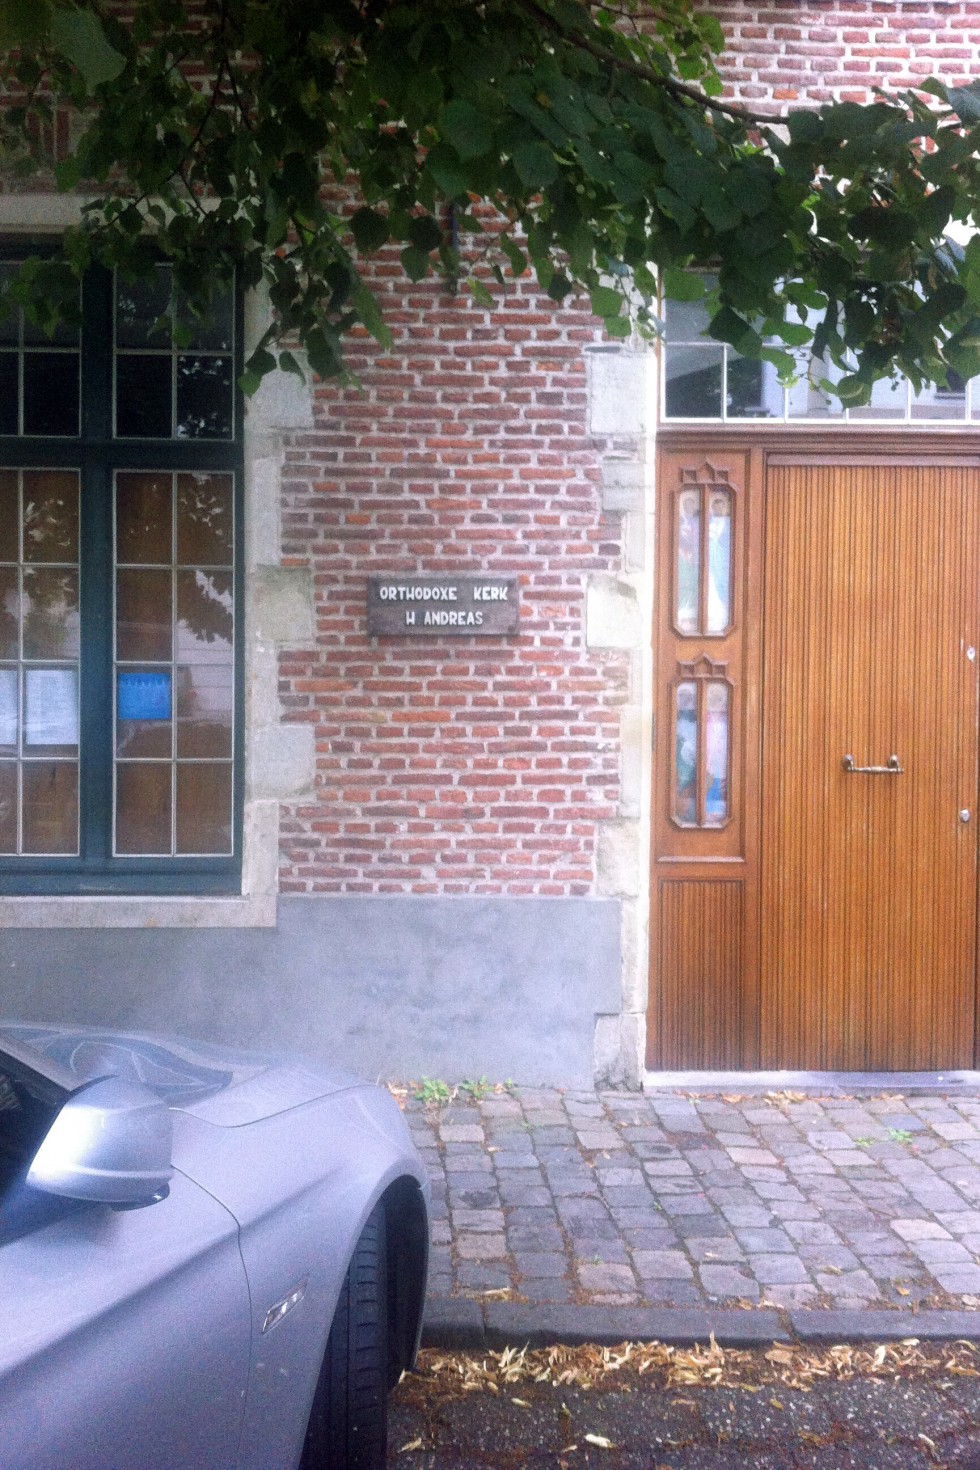 The entrance to the building where Fr. Ignace founded his parish